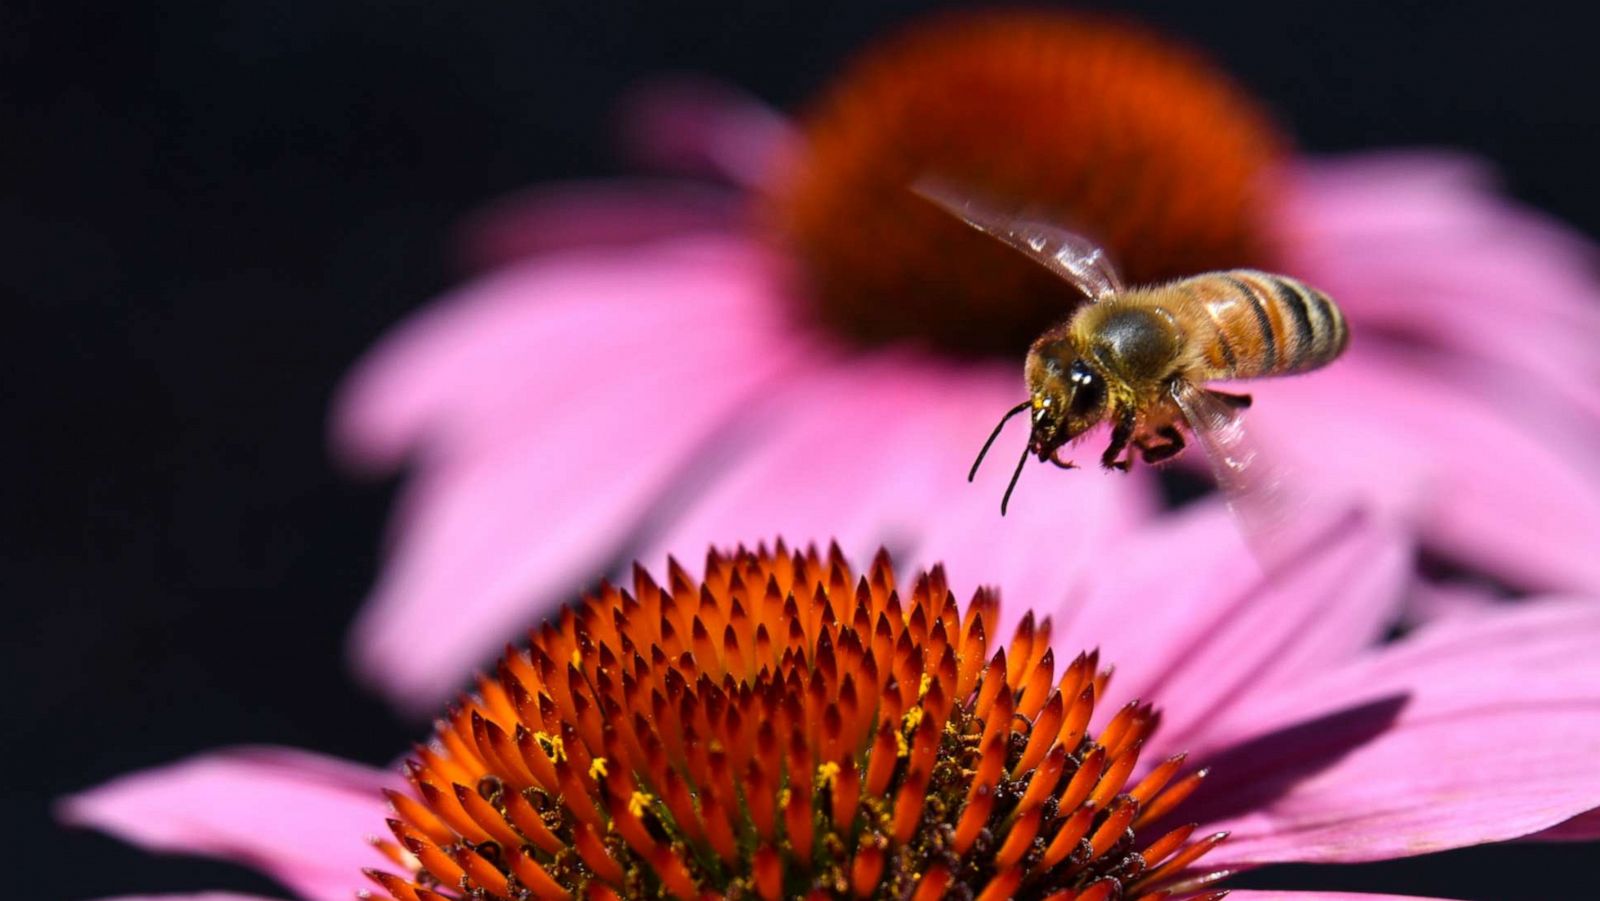 Nearly 40% decline in honey bee population last winter 'unsustainable,'  experts say - ABC News